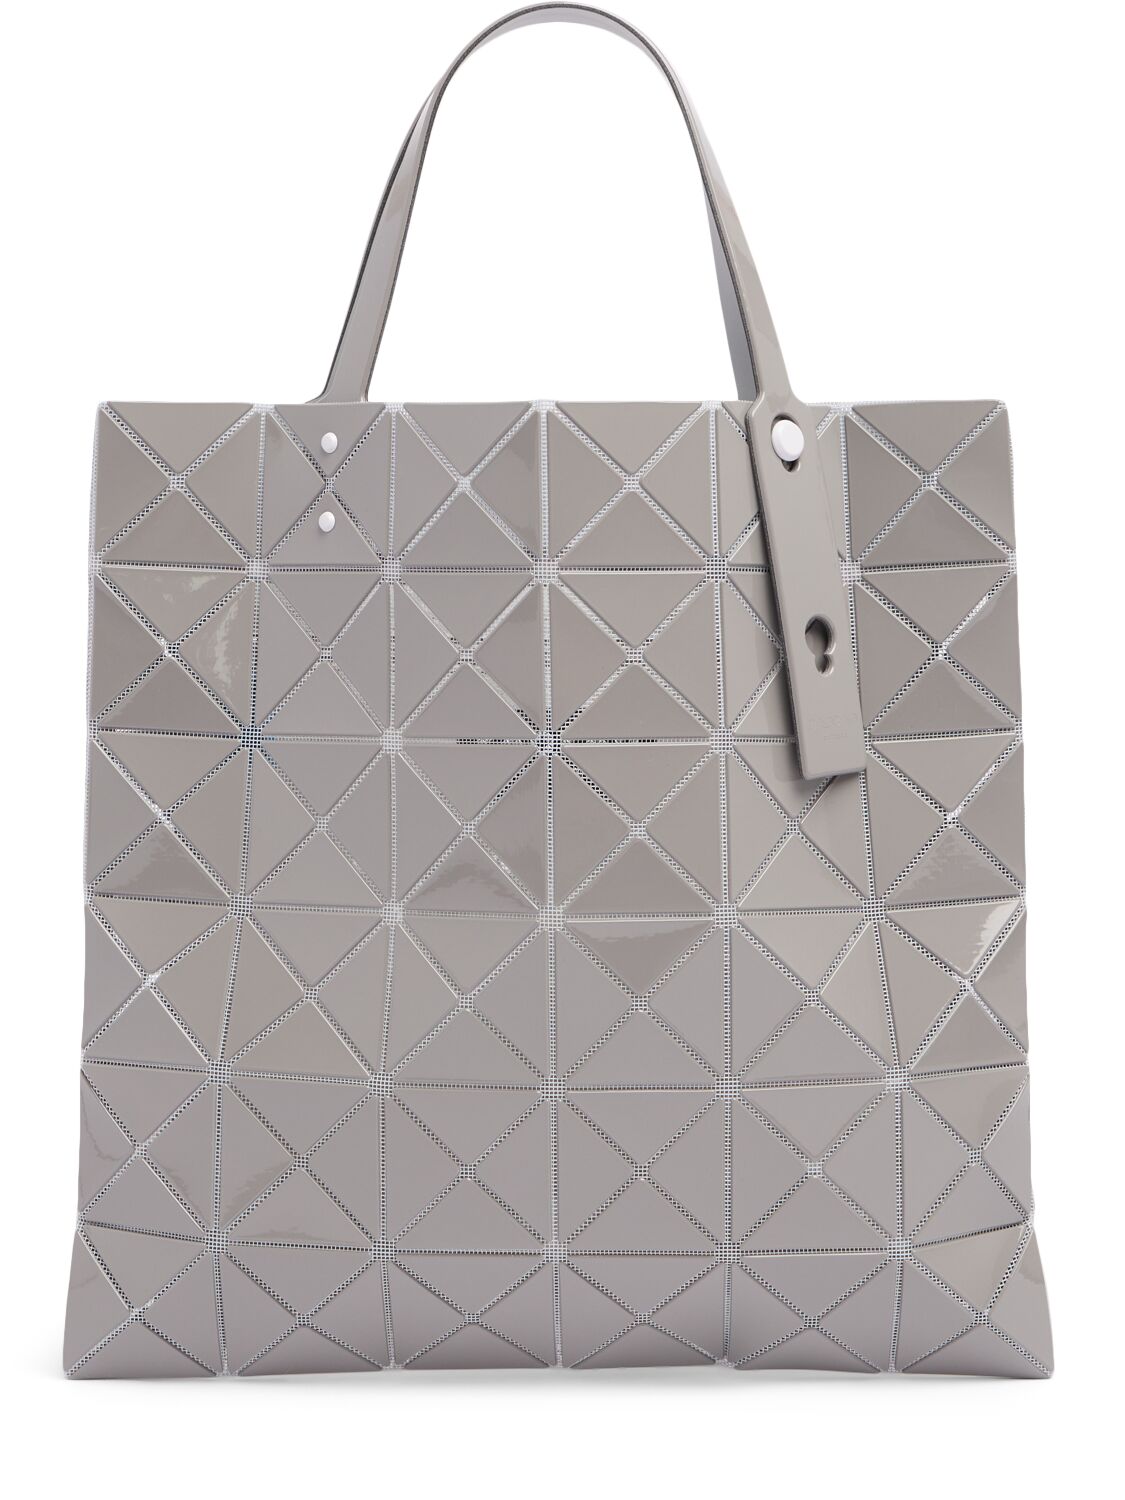 Image of Lucent Gloss Tote Bag